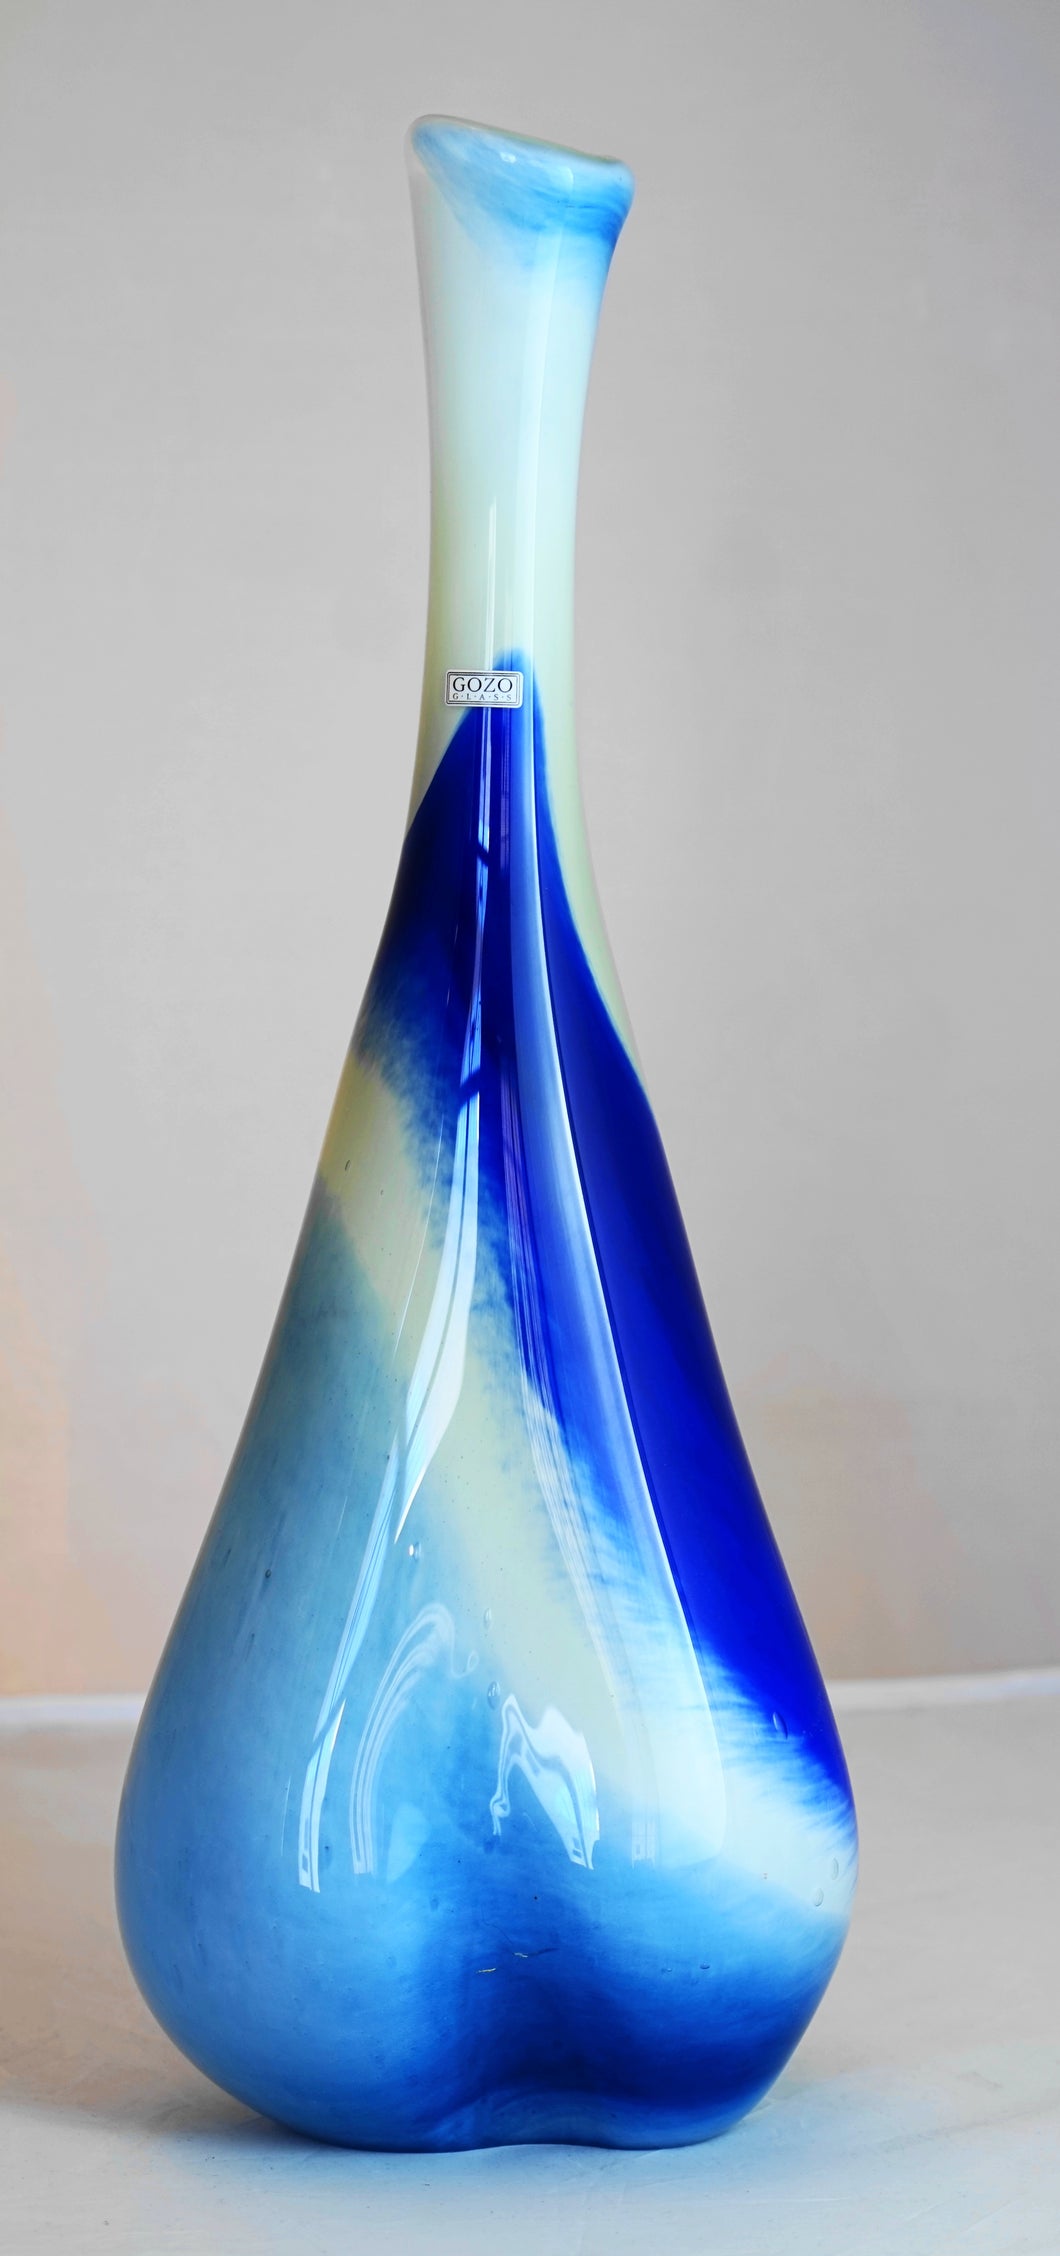 Shades of Blue LIMITED EDITION VASE - ONLY ONE AVAILABLE